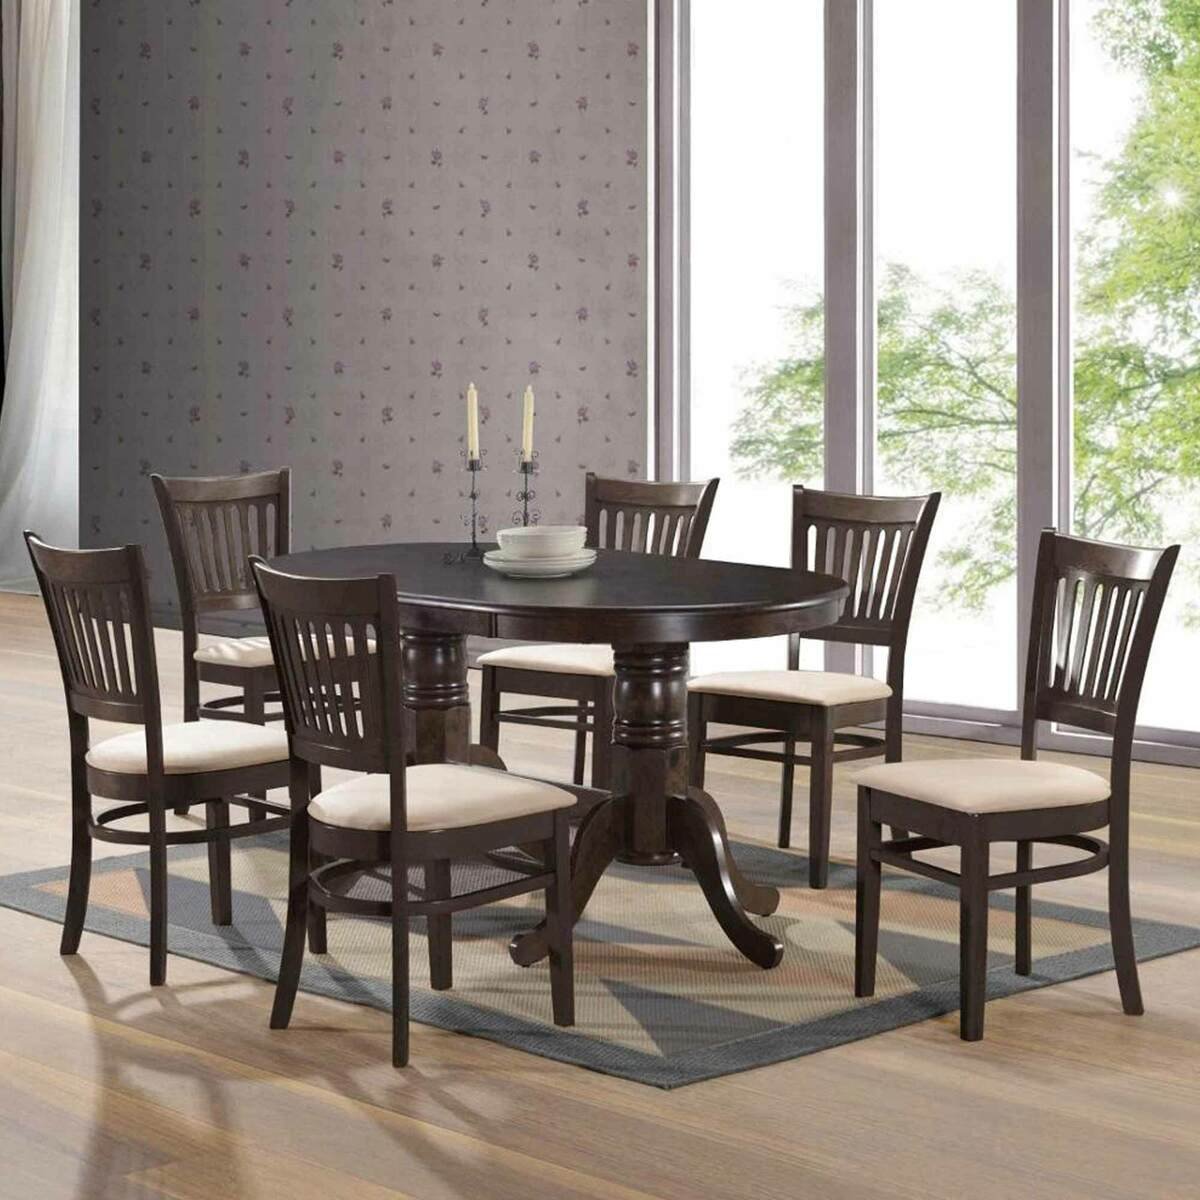 Maple Leaf Home Dining Table Oval Size: L149 x W89 x H76cm + 6 Chair Mahogany Color